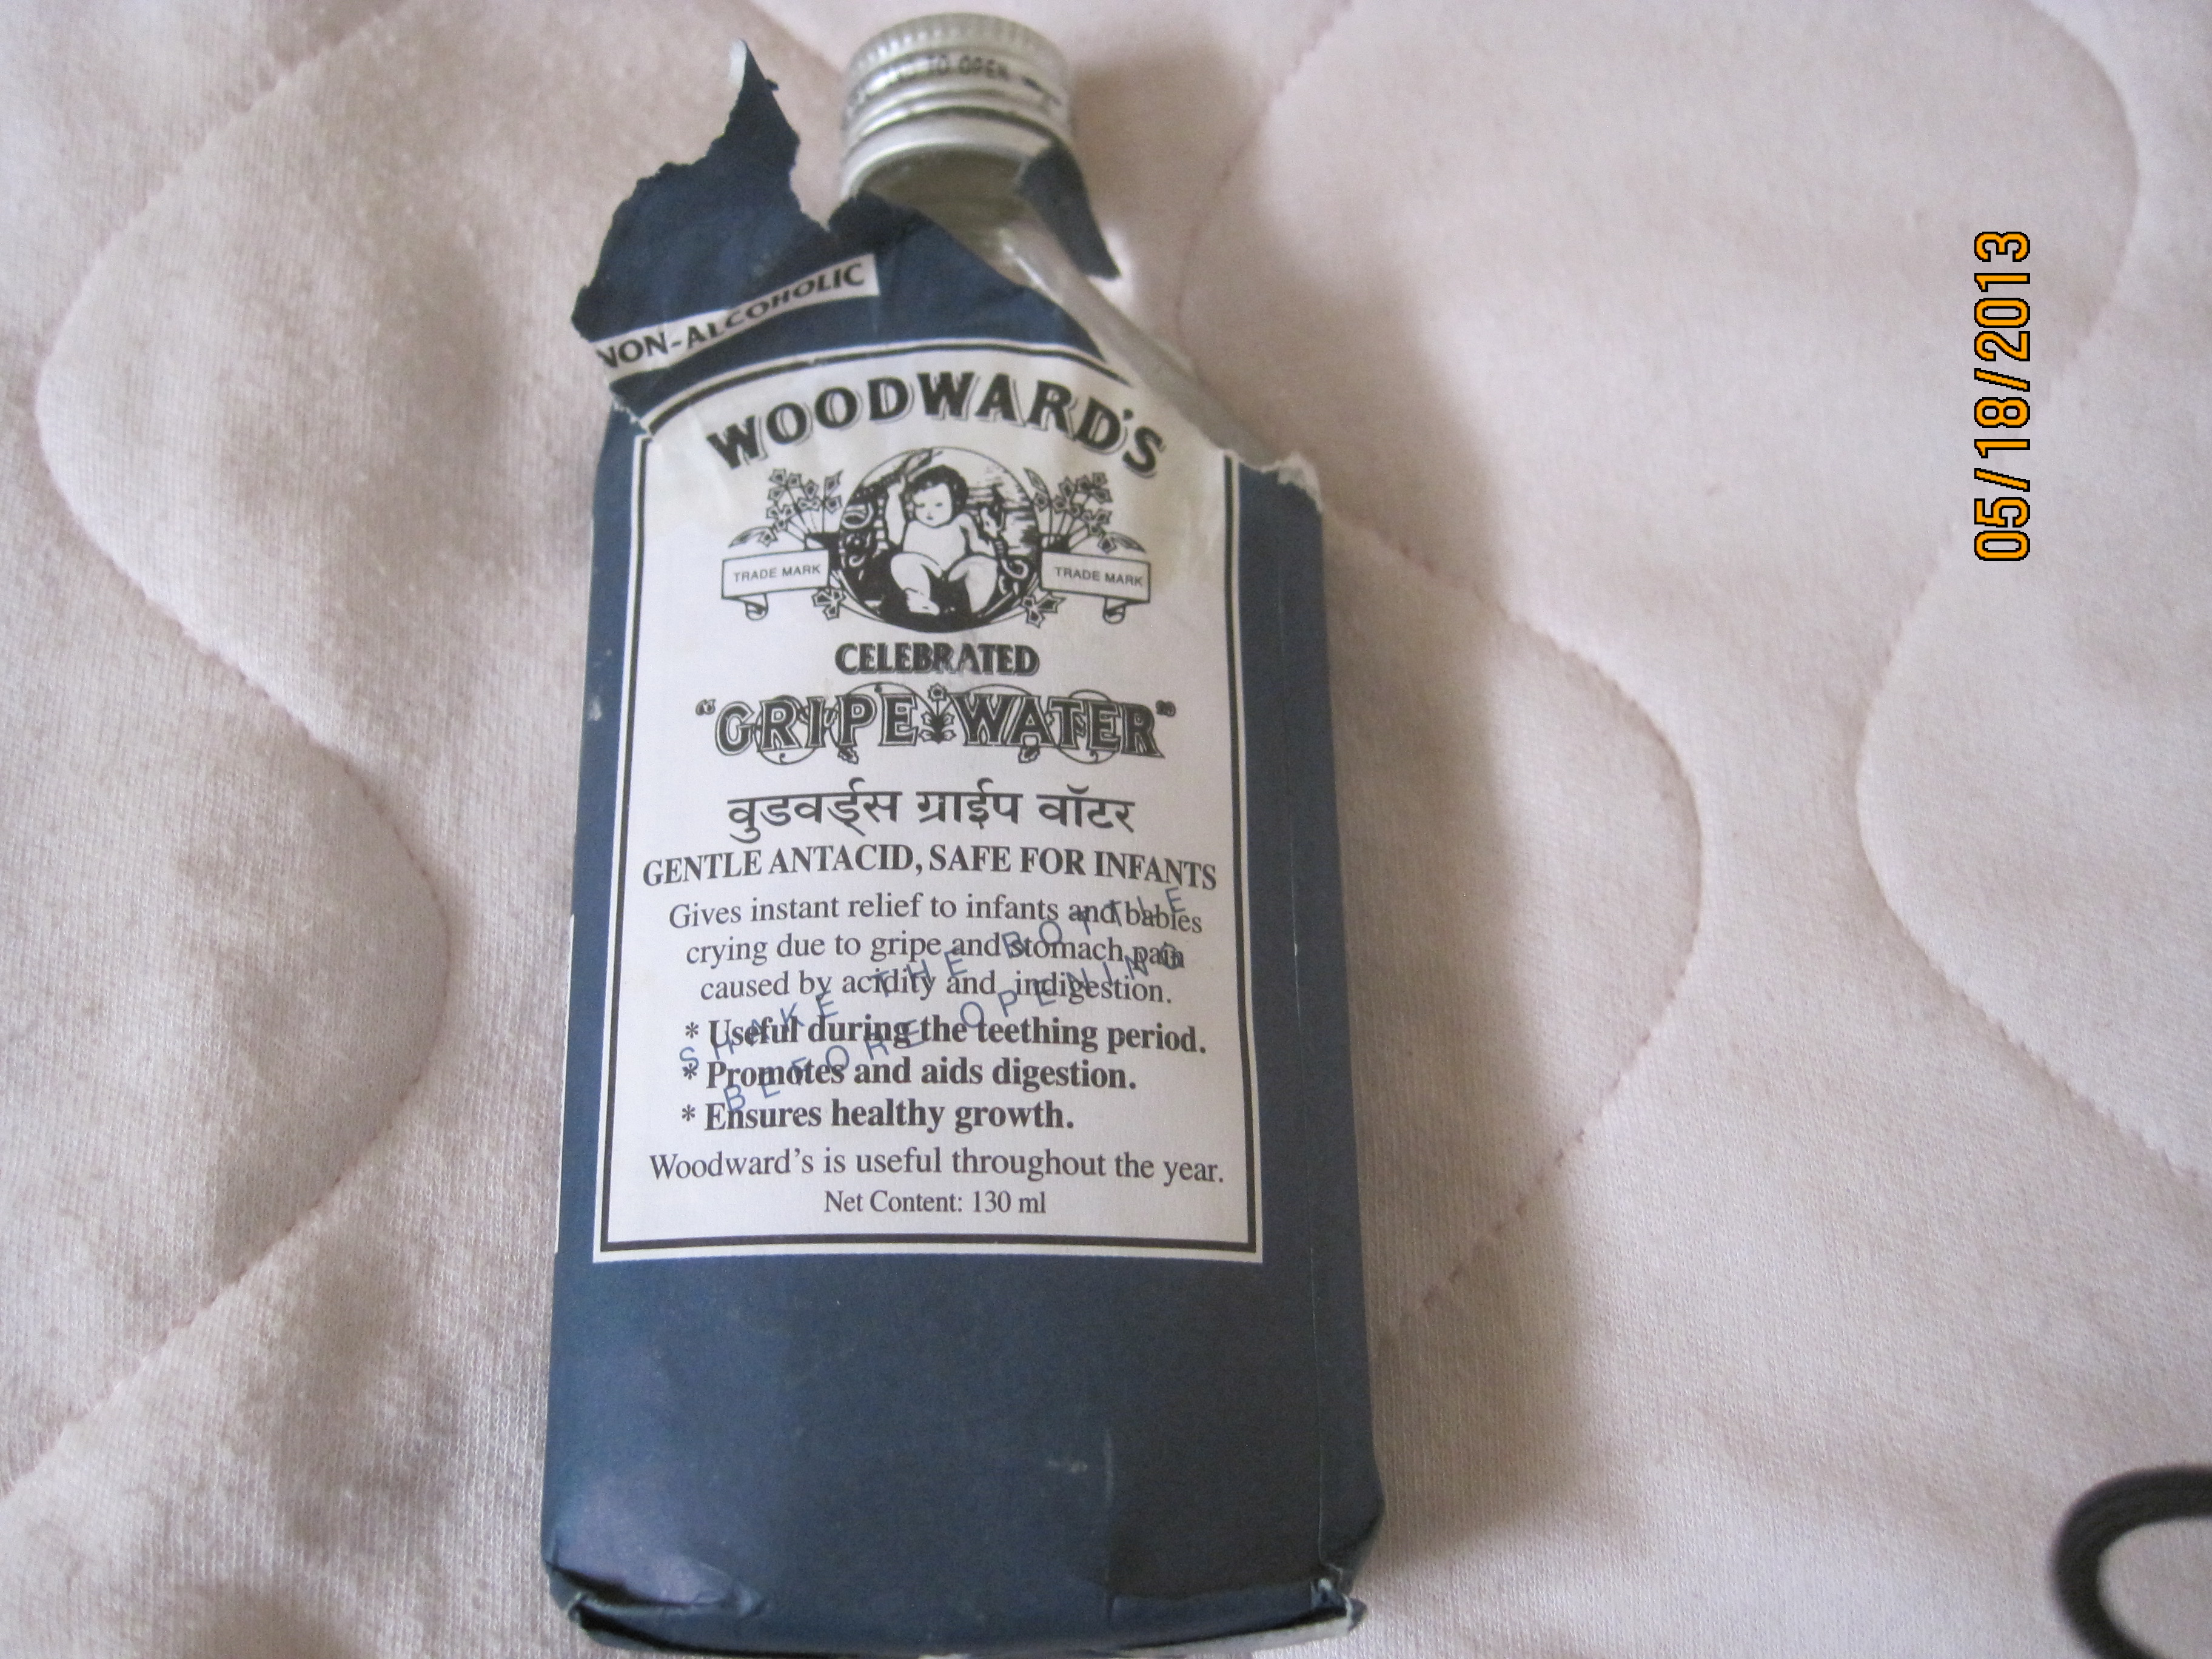 woodwards gripe water contains